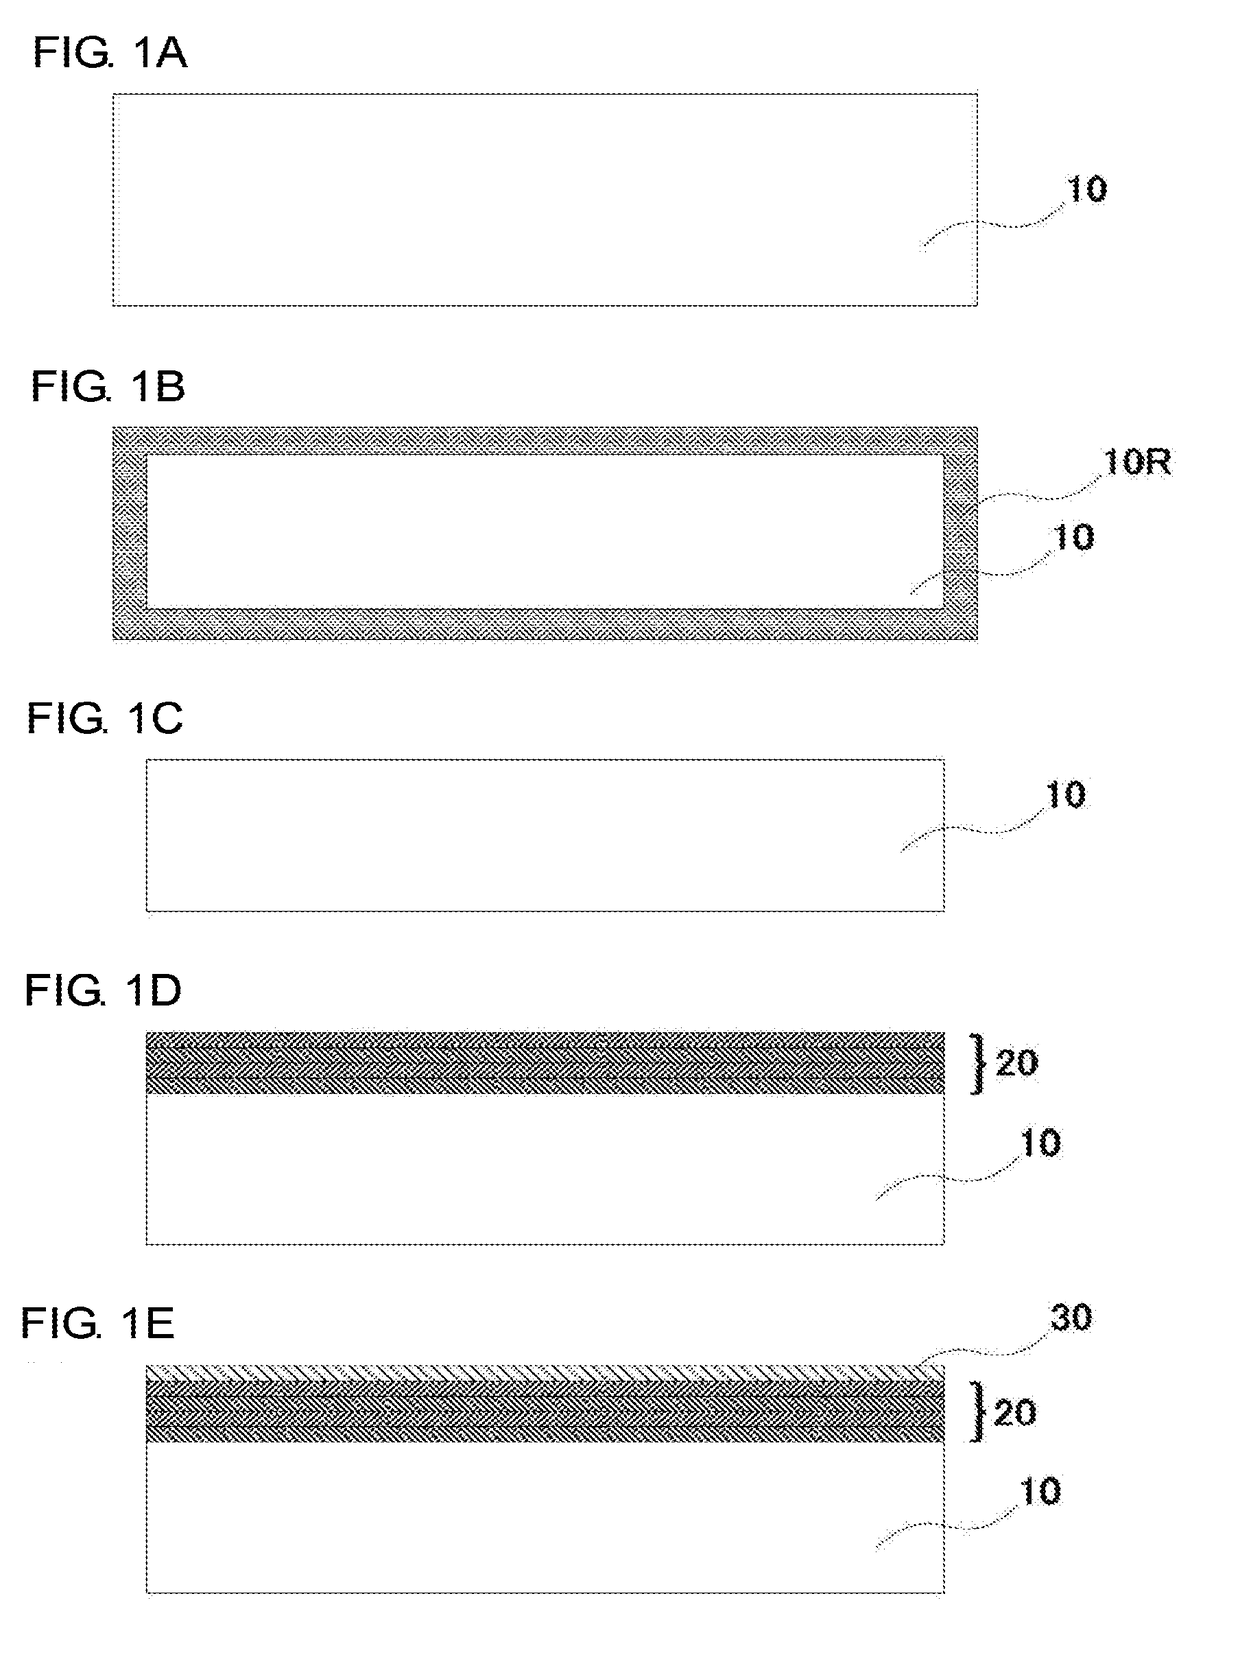 Cover glass and process for producing the same